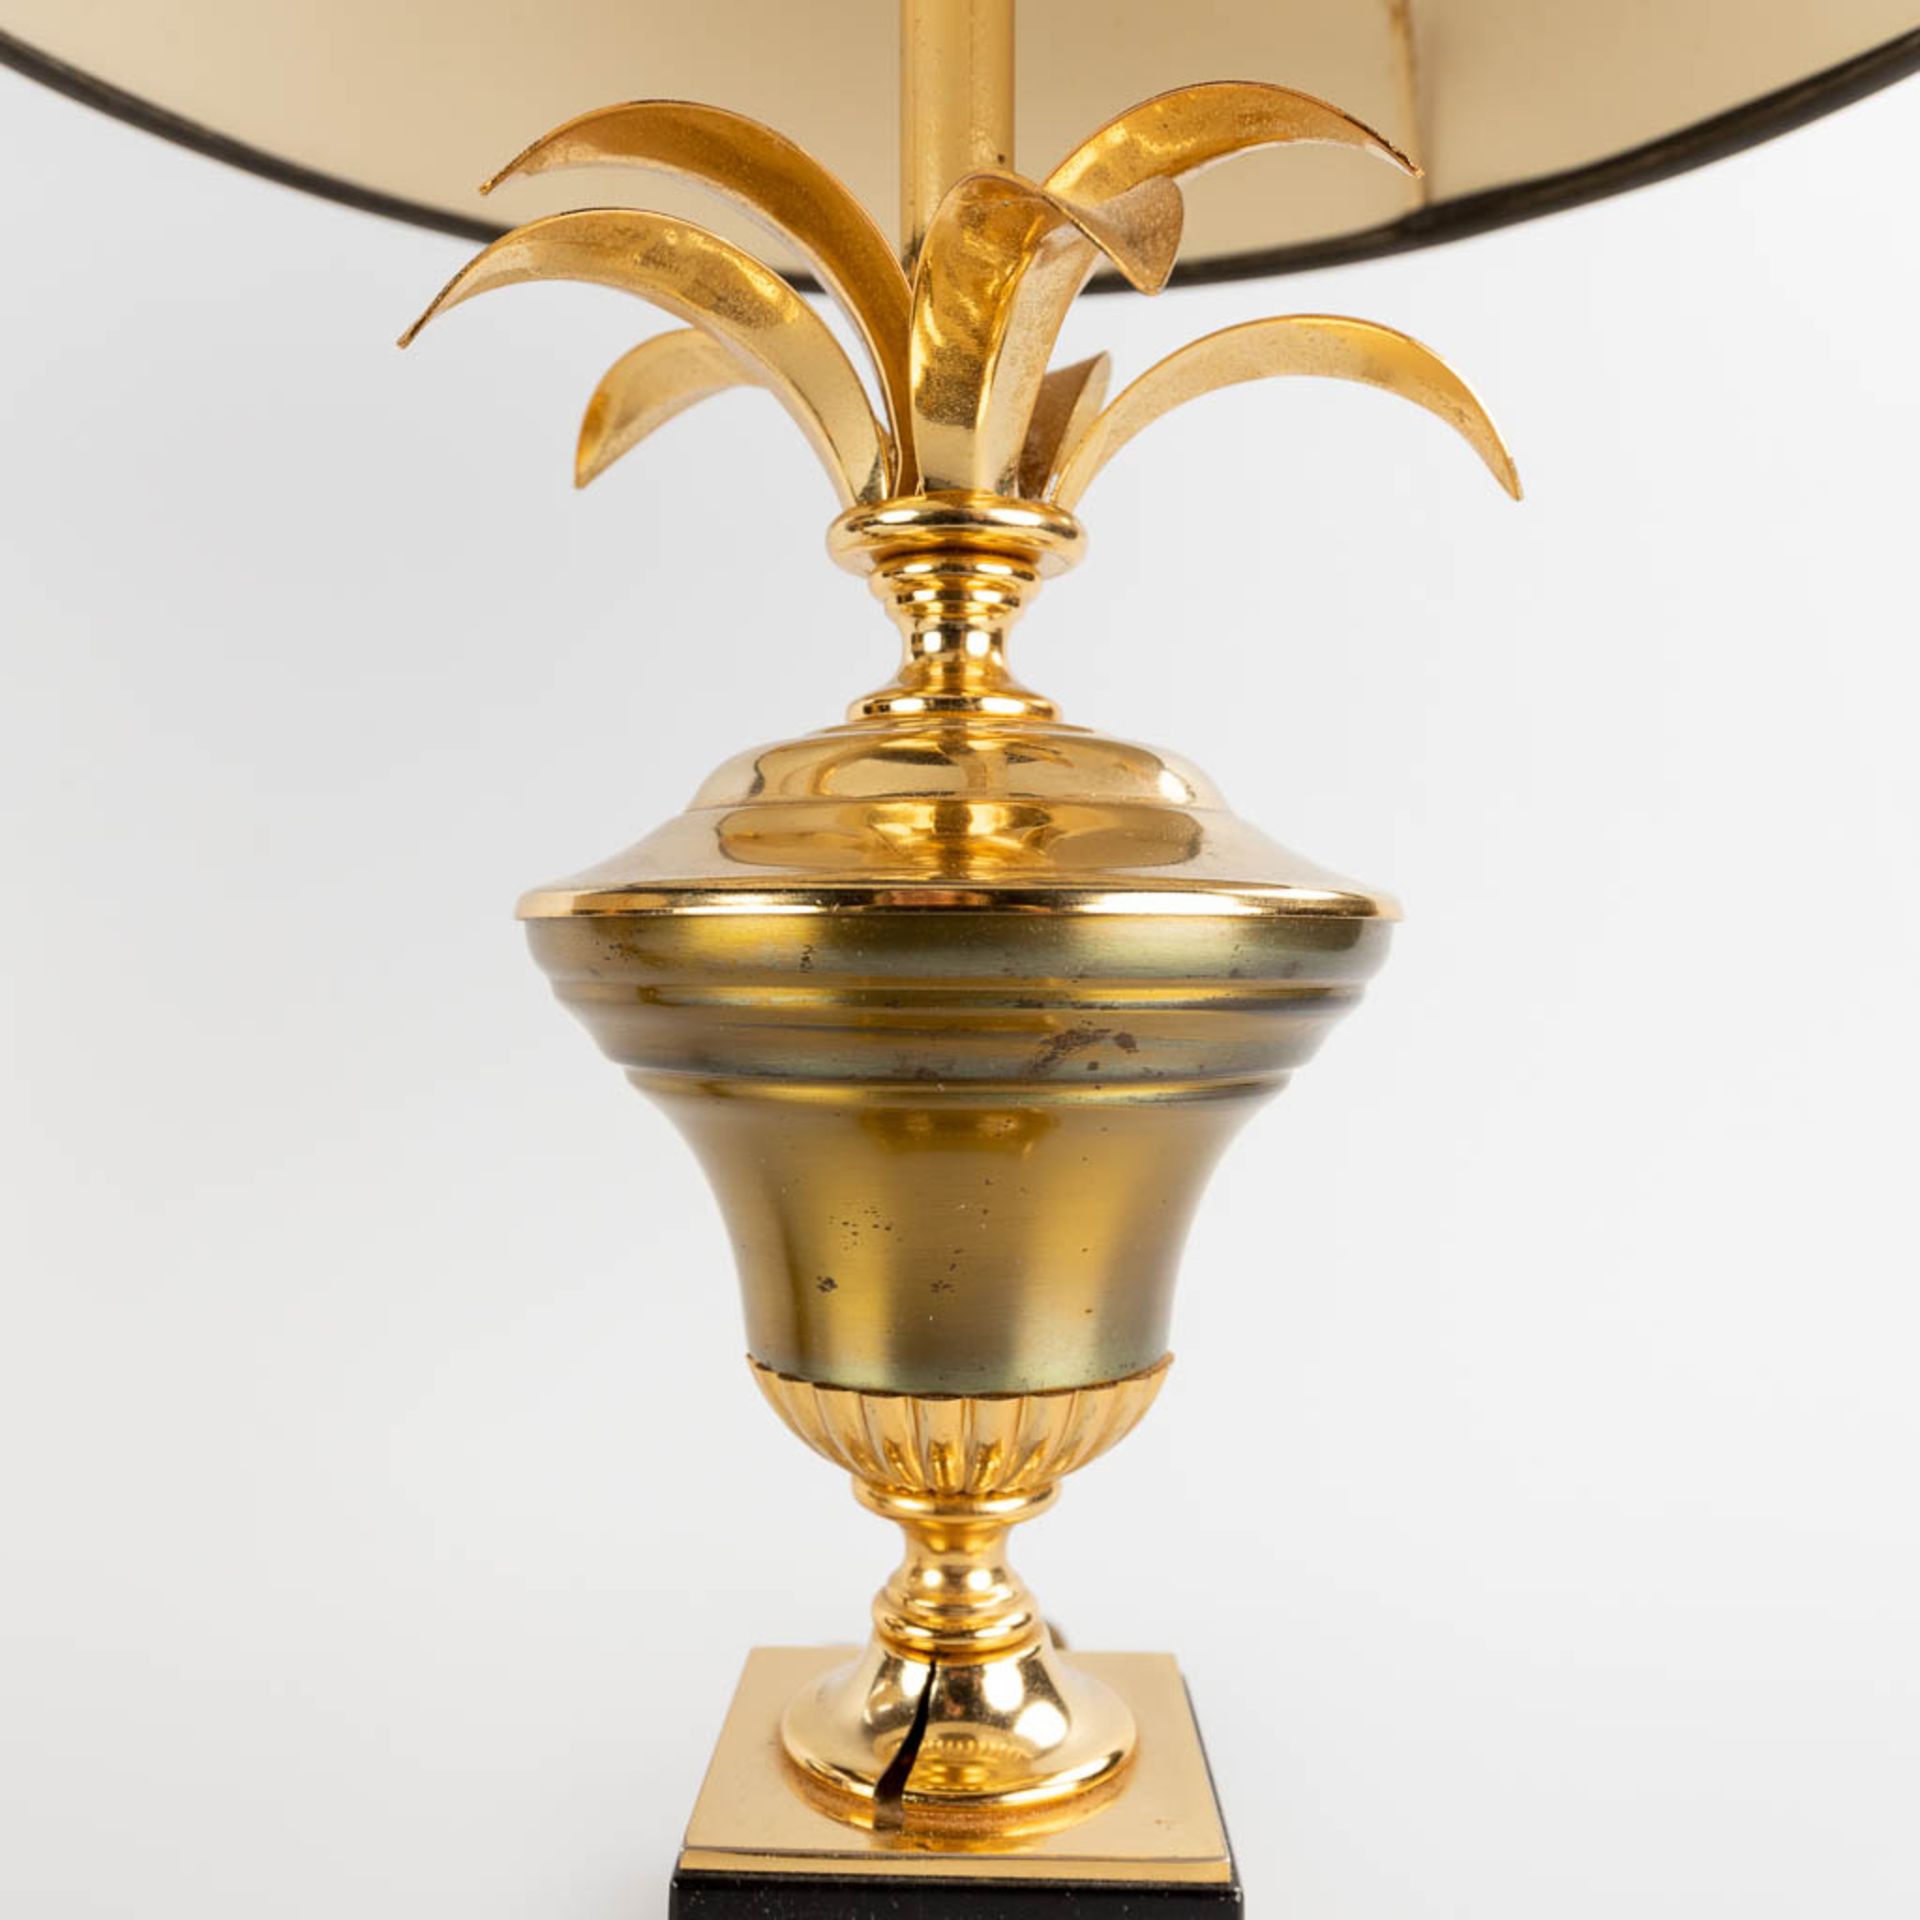 A pair of table lamps, Hollywood Regency style. 20th C. (H:54 x D:30 cm) - Image 6 of 10